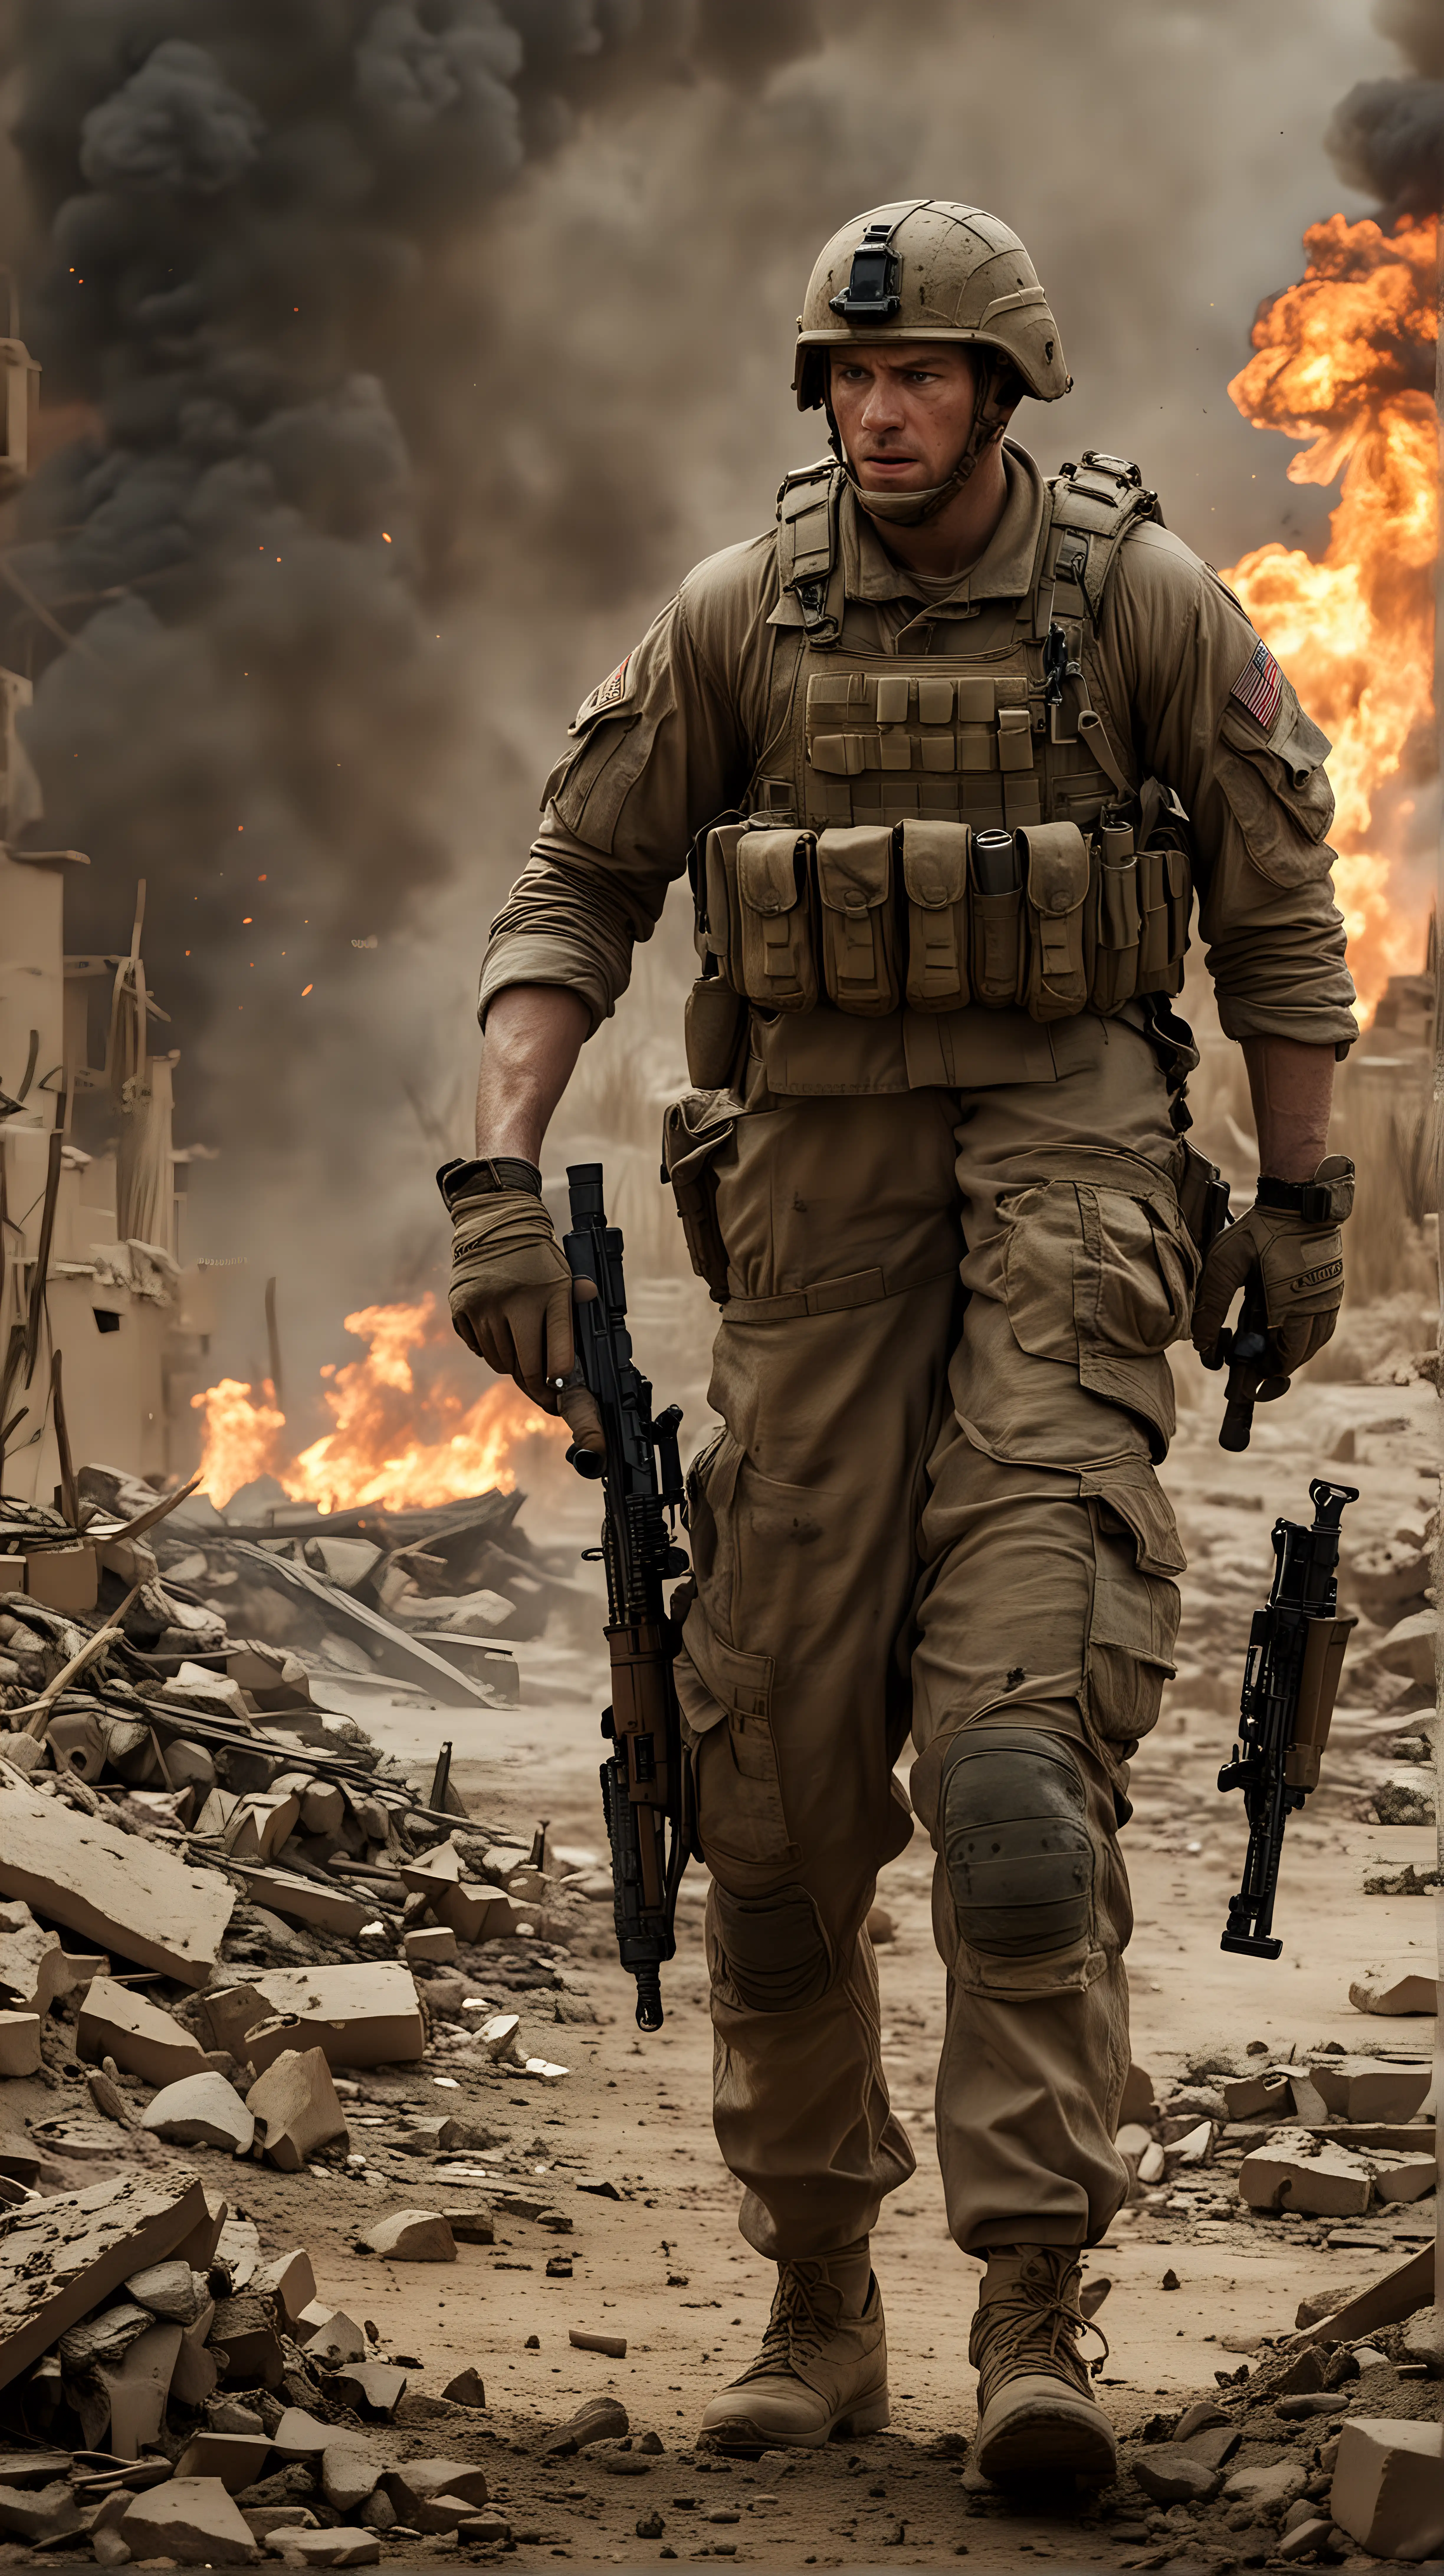 Combat Action
Illustrate a tense firefight scene, highlighting Ryan's courage and resilience amidst the chaos of battle.
Caption: "Amidst the chaos of war, Ryan stands firm, courageously facing the enemy in the heat of combat."